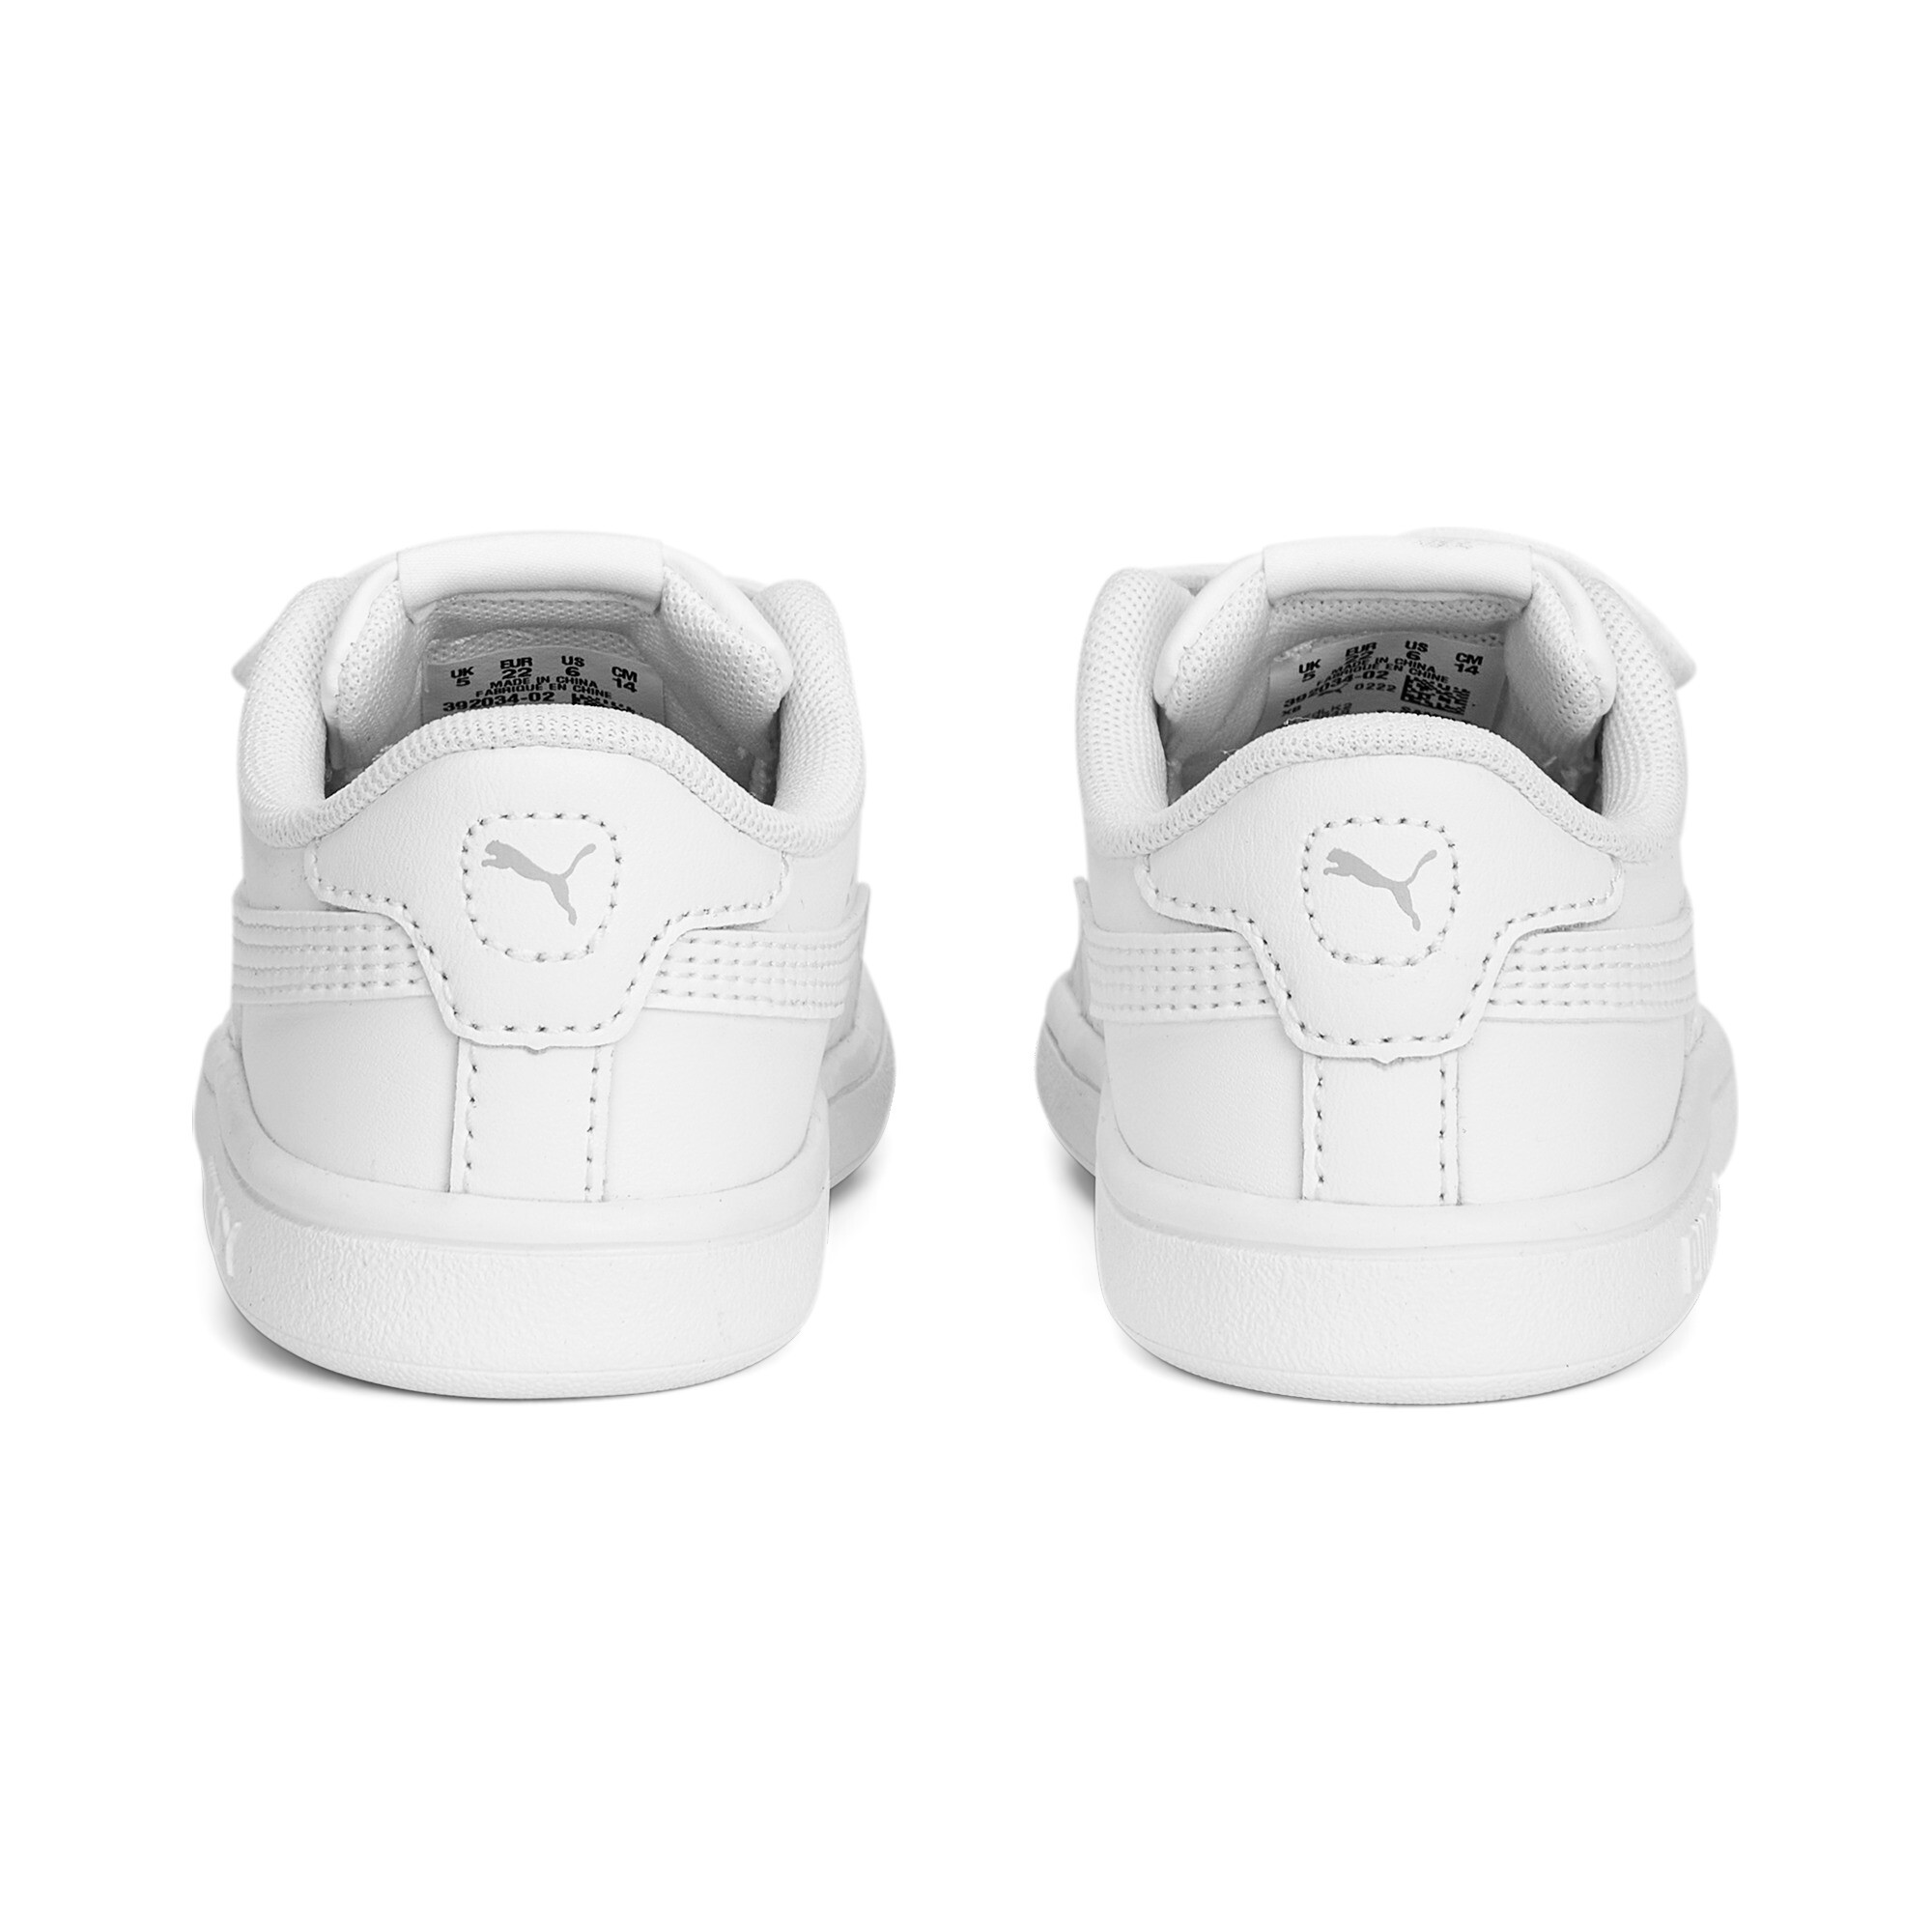 Kids' PUMA Smash 3.0 Leather V Sneakers Baby In White, Size EU 24